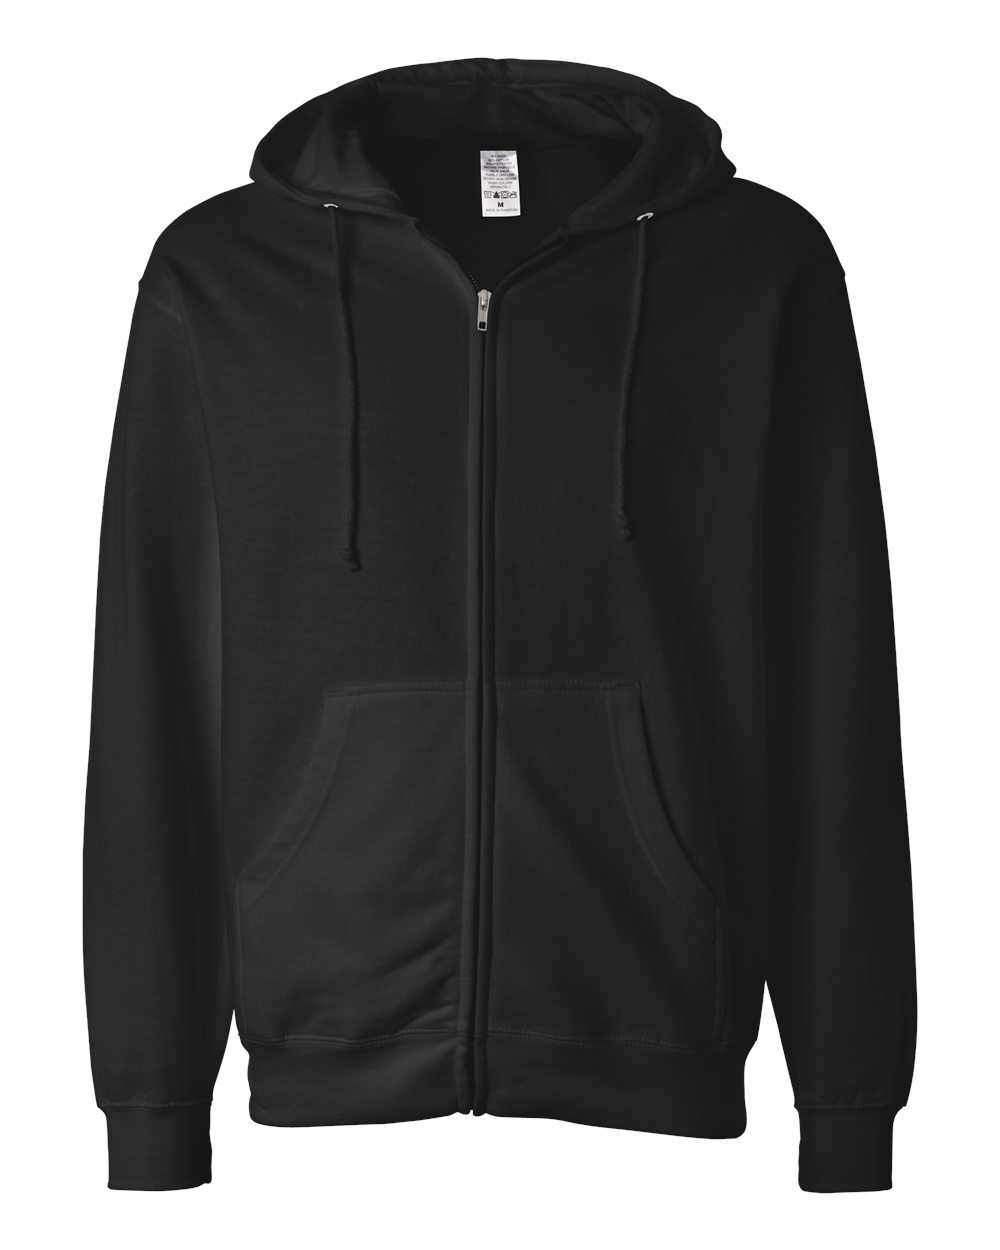 fully customizable independent midweight zipper hoodie sweater pullover in multiple sizes and colors